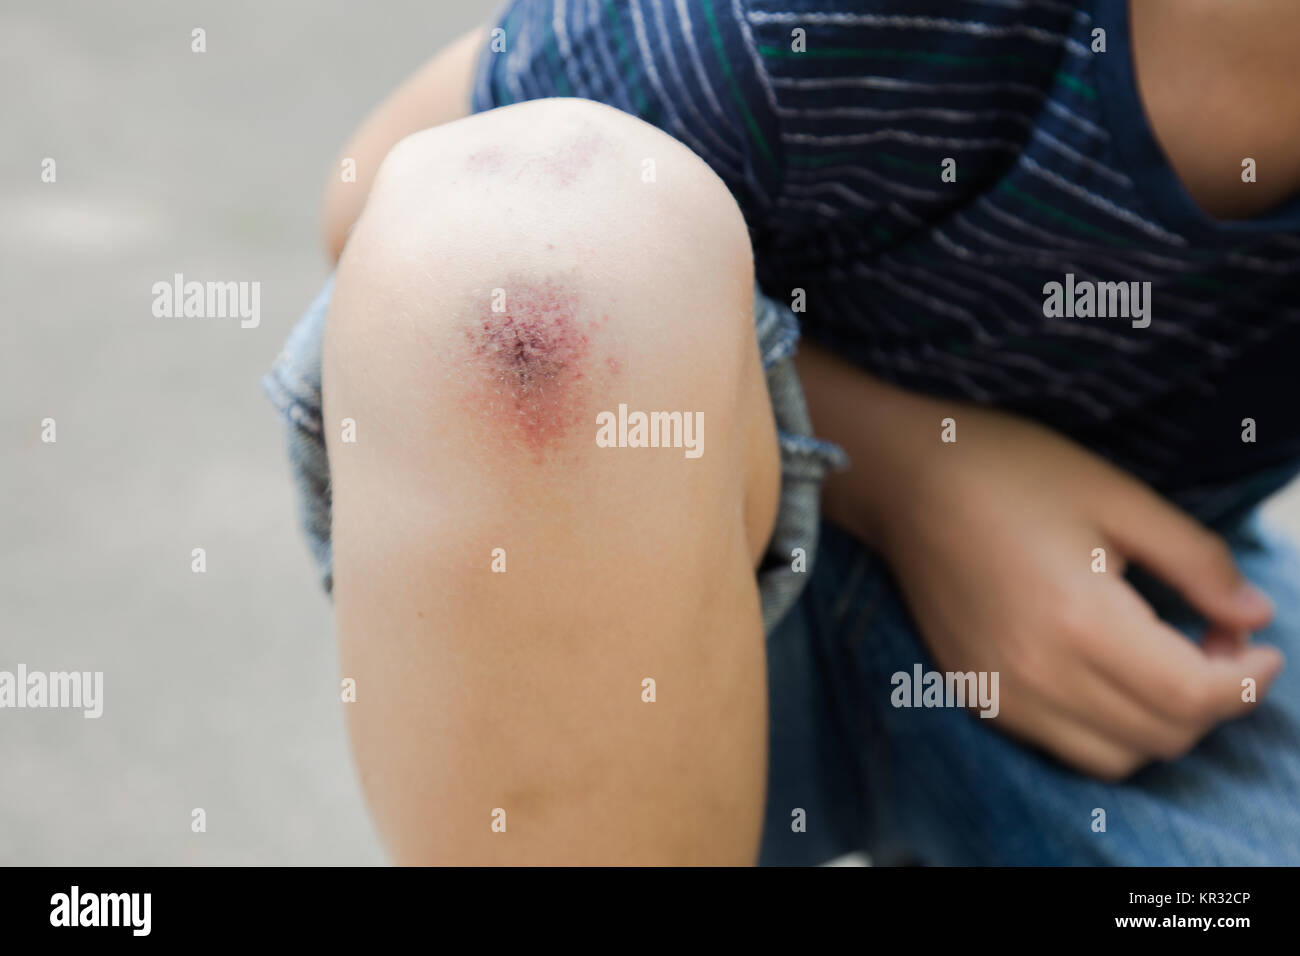 Closeup of injured young kid's knee after he fell down on pavement.  Horizontal color image. Stock Photo